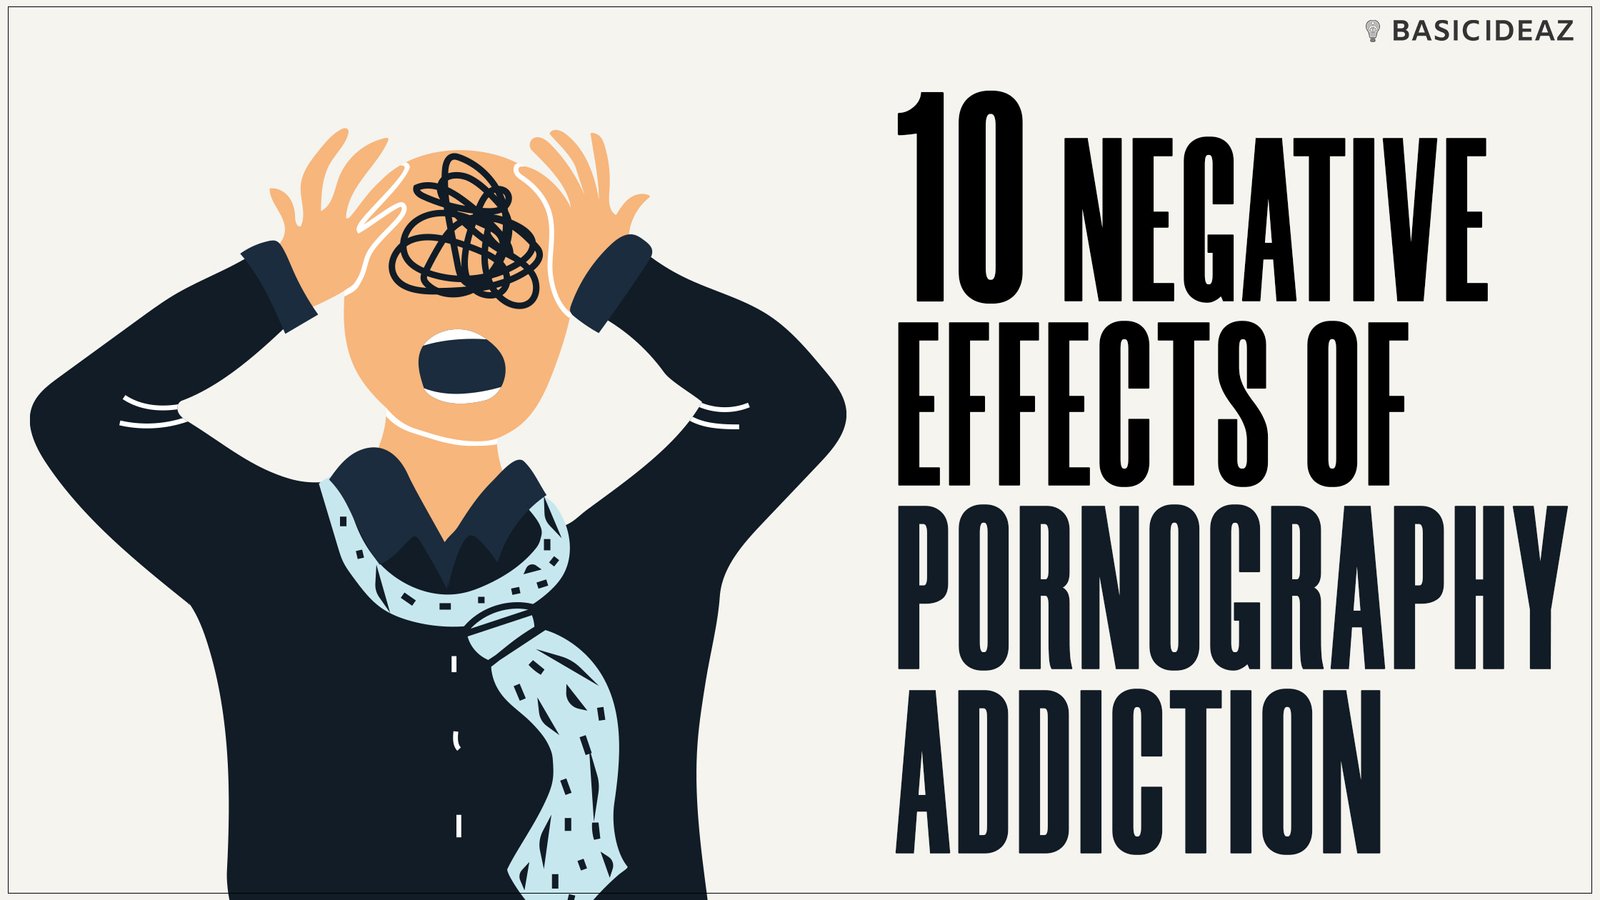 The Affect Of Porn - 10 Negative Effects of Pornography Addiction - BasicIdeaz